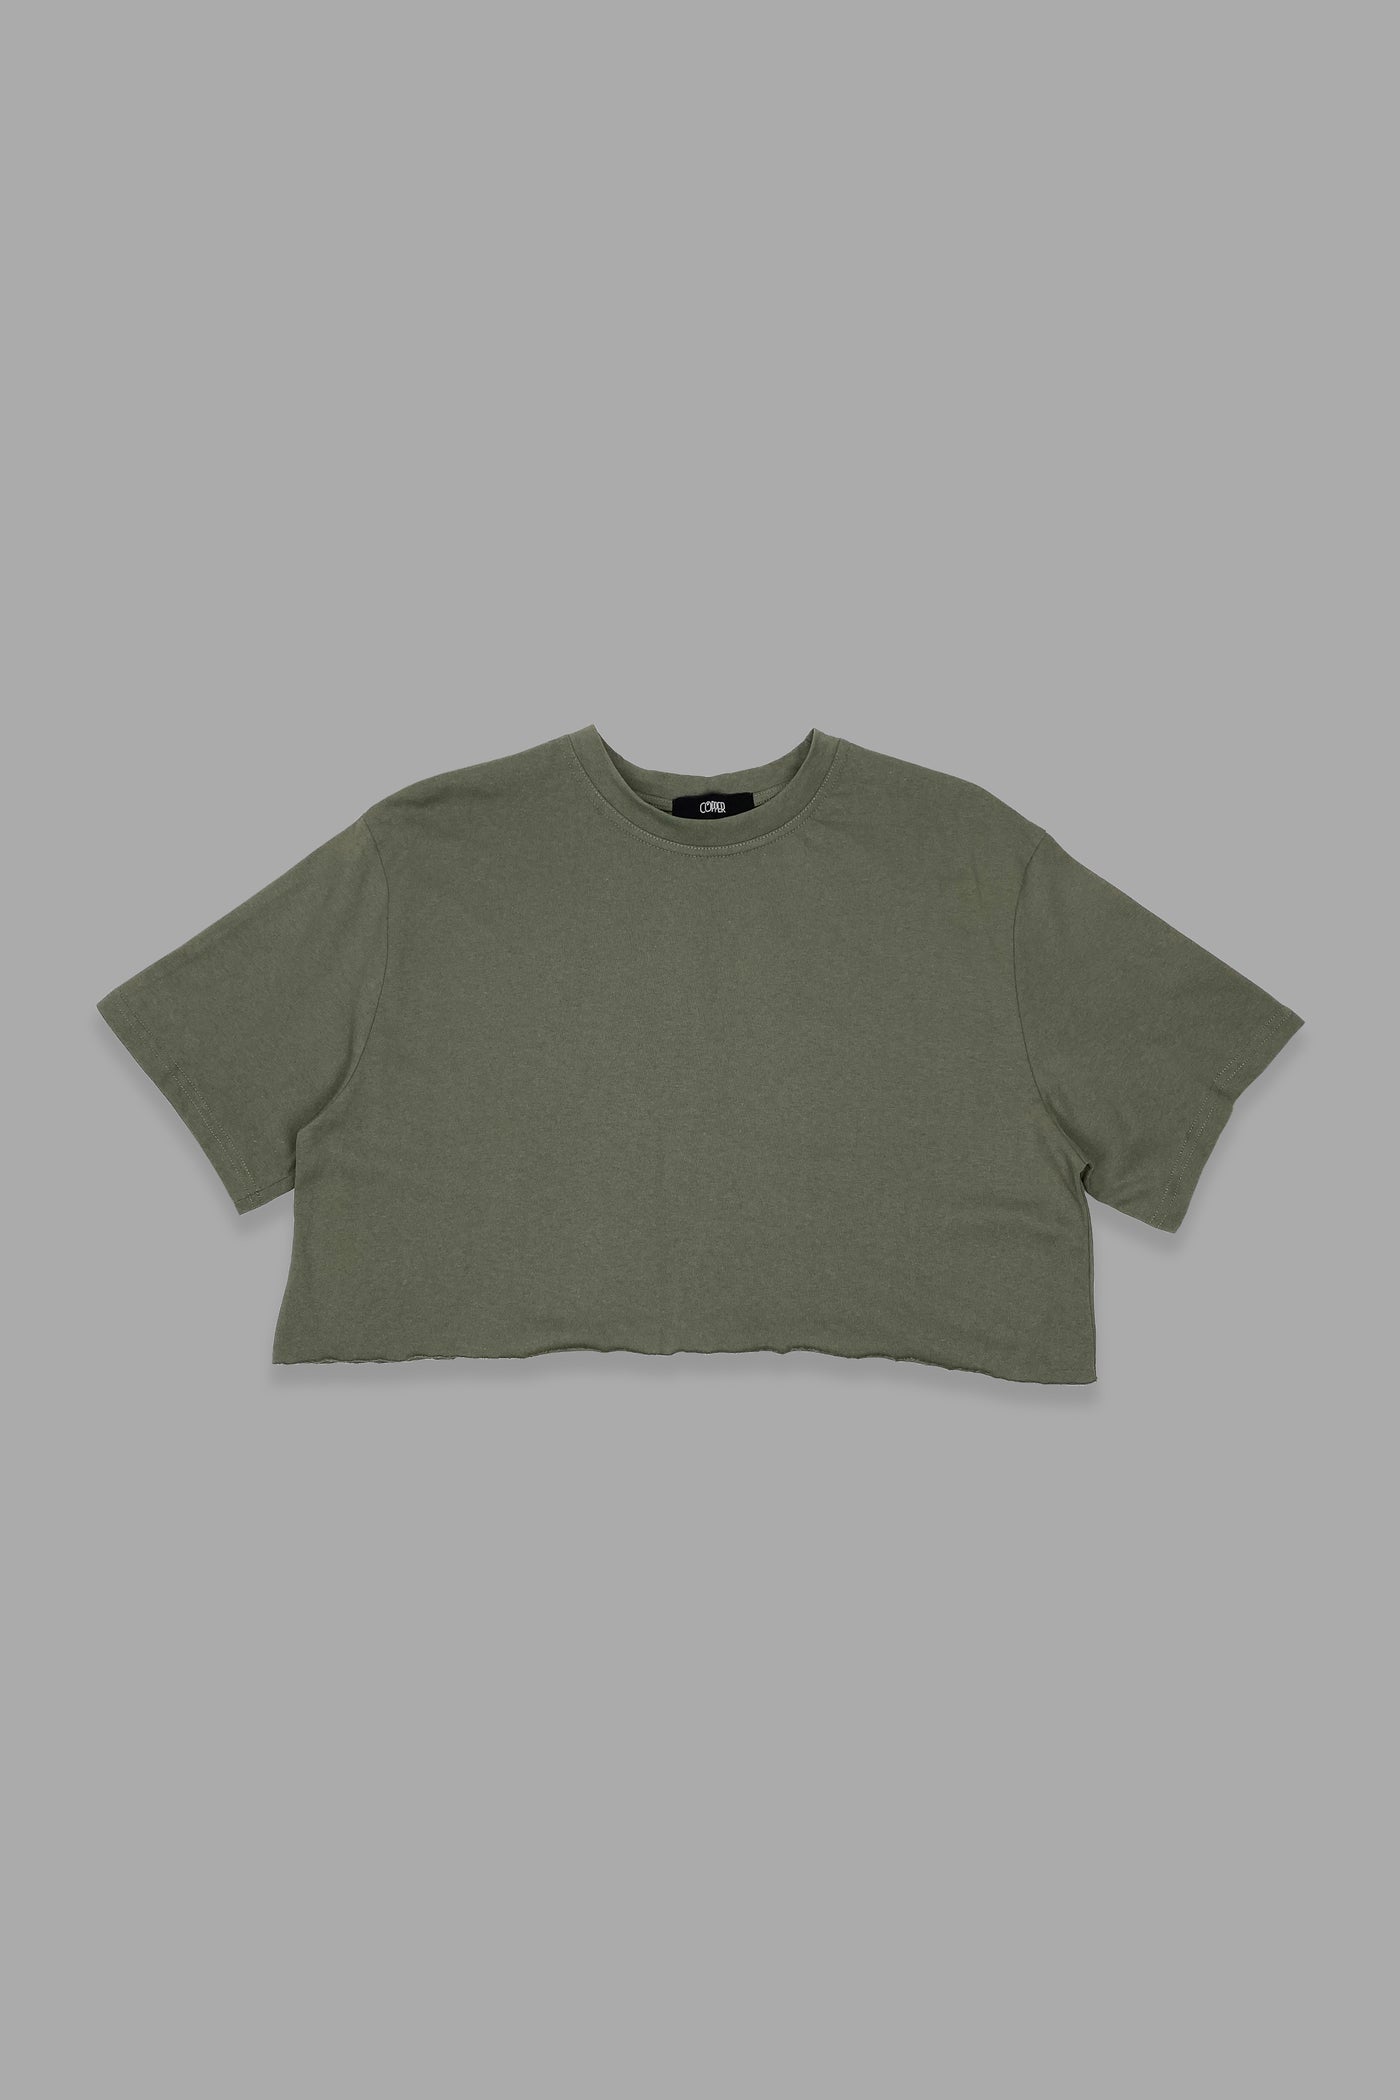 Half The Day Cropped Boxy Tee - Hunter